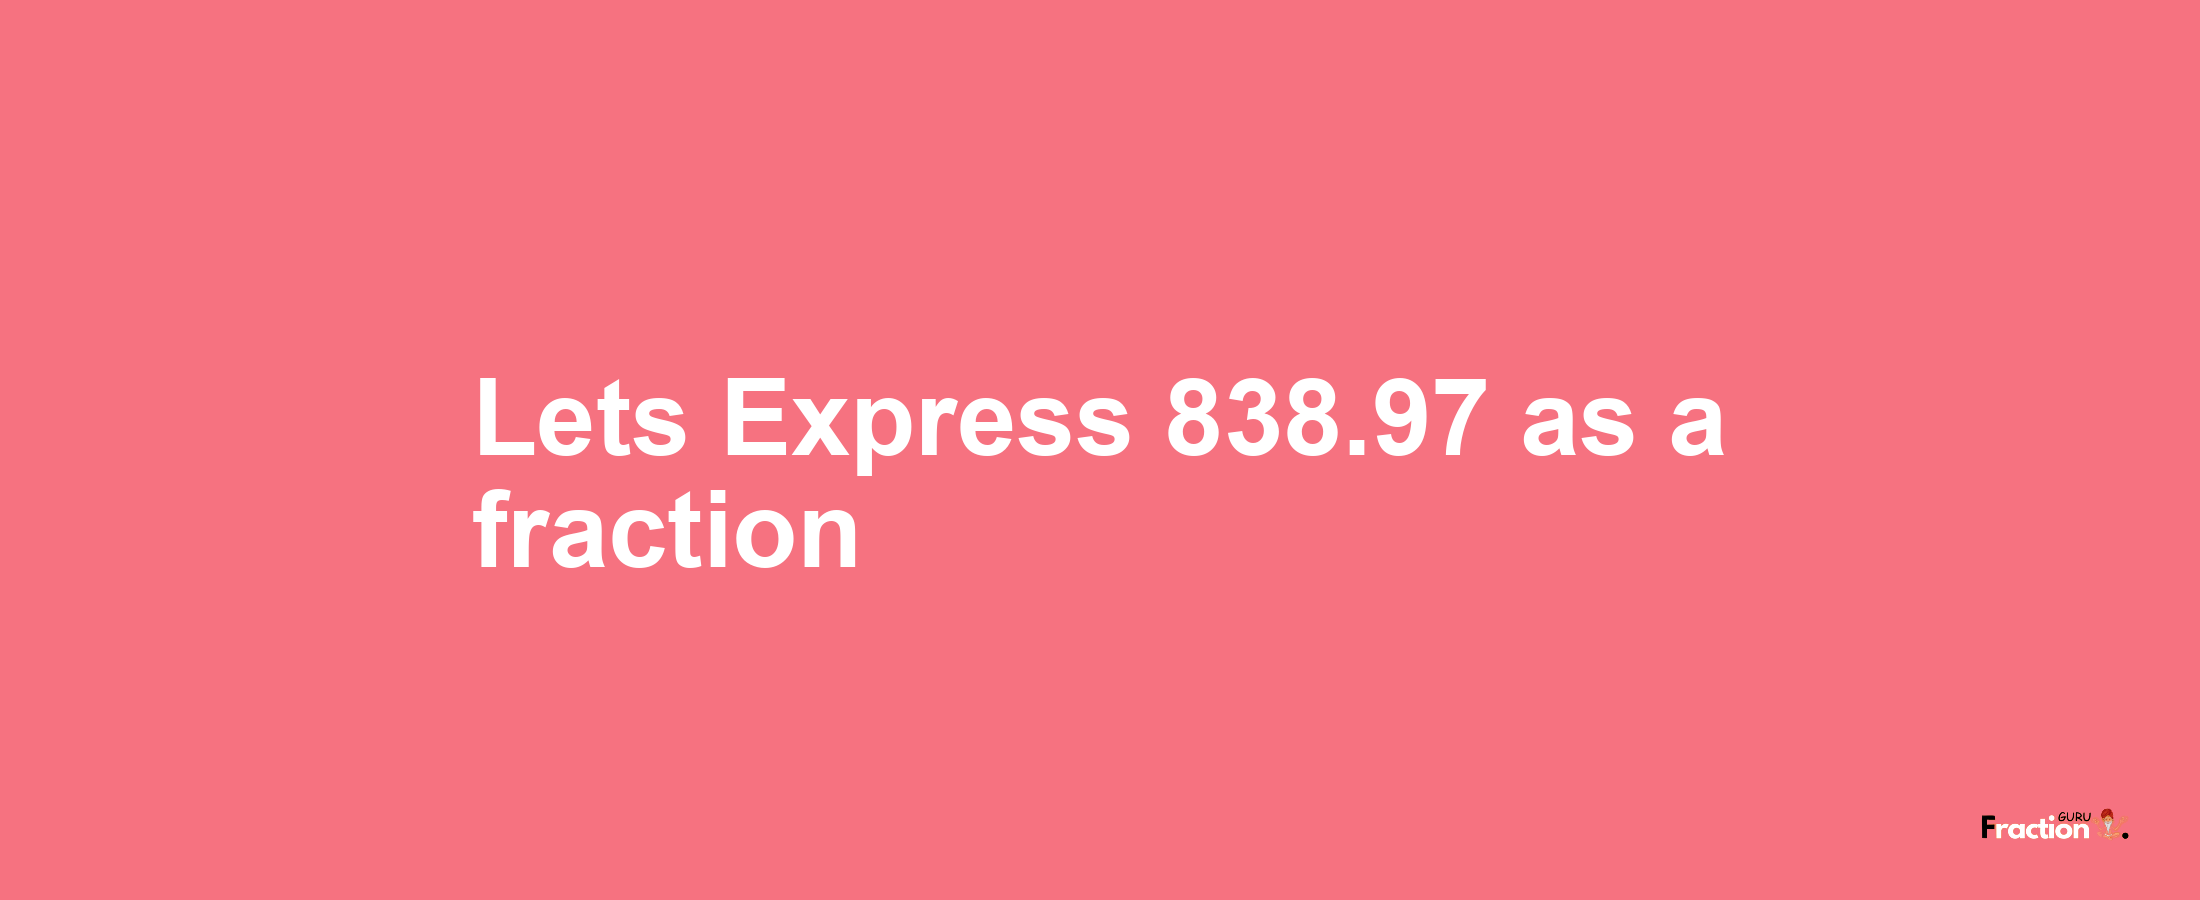 Lets Express 838.97 as afraction